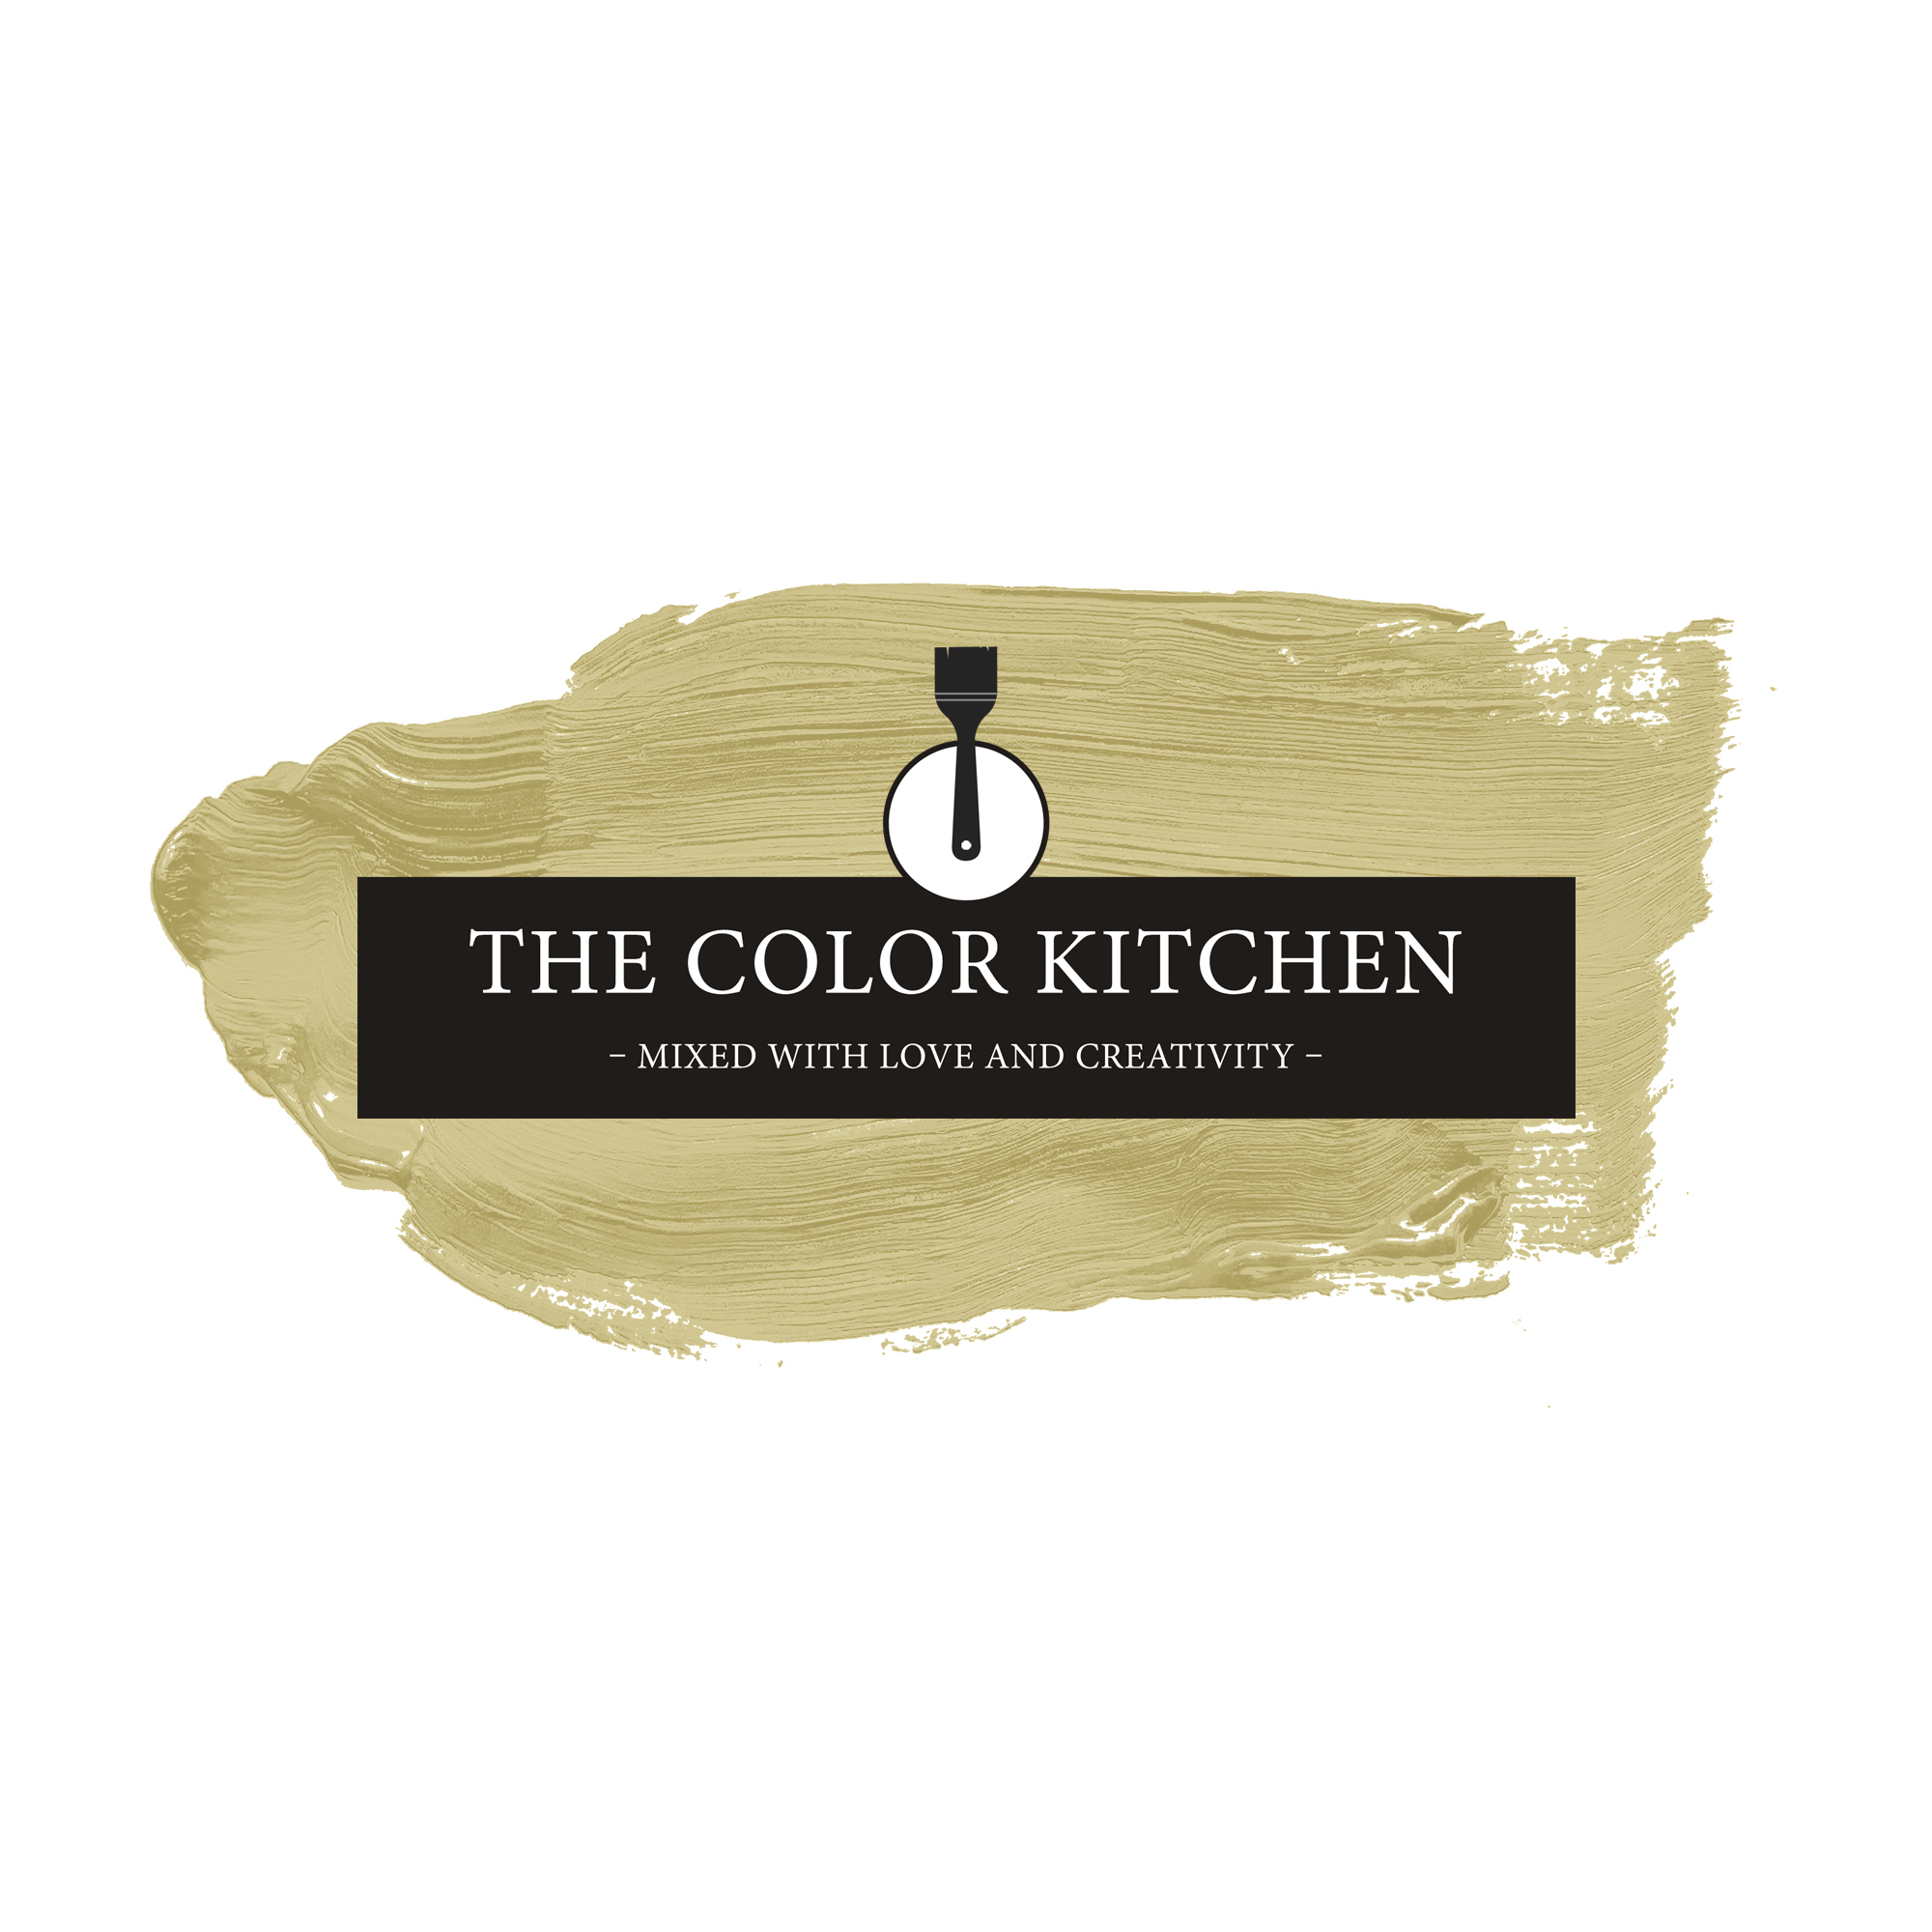 The Color Kitchen Hot Peppers 2,5 l